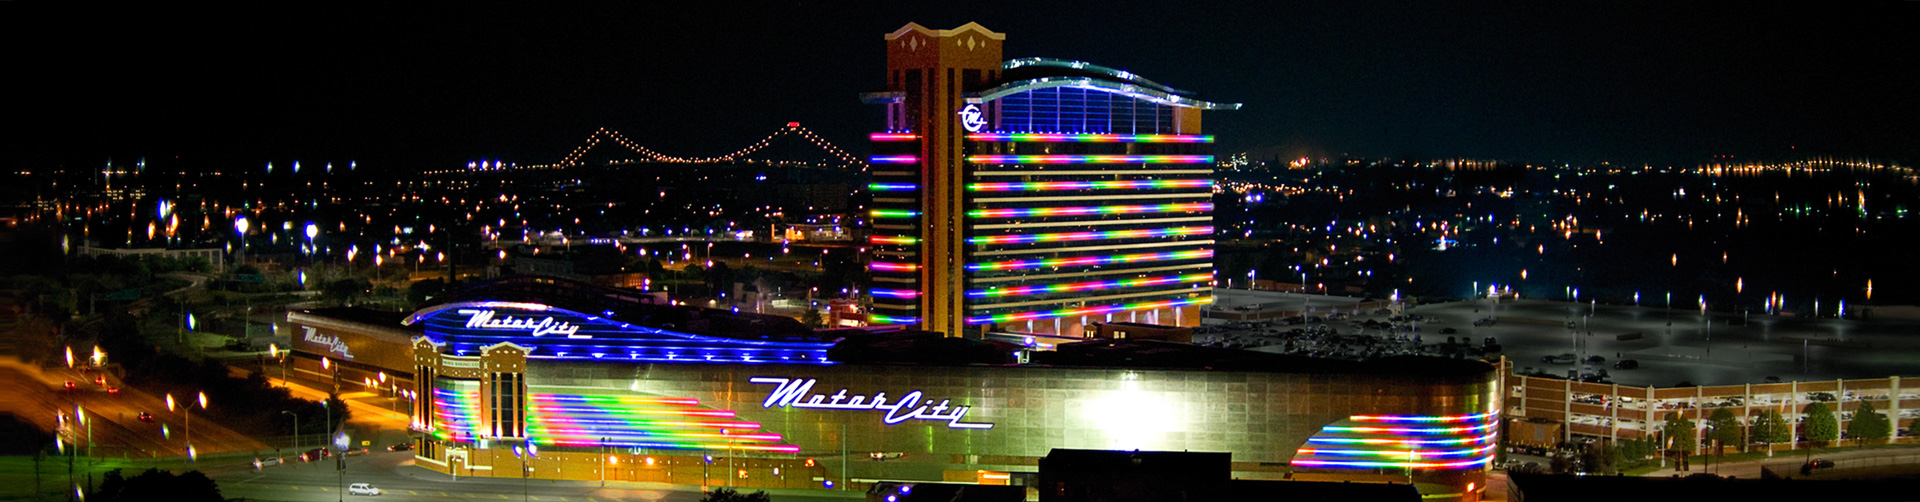 who owns motor city casino in detroit